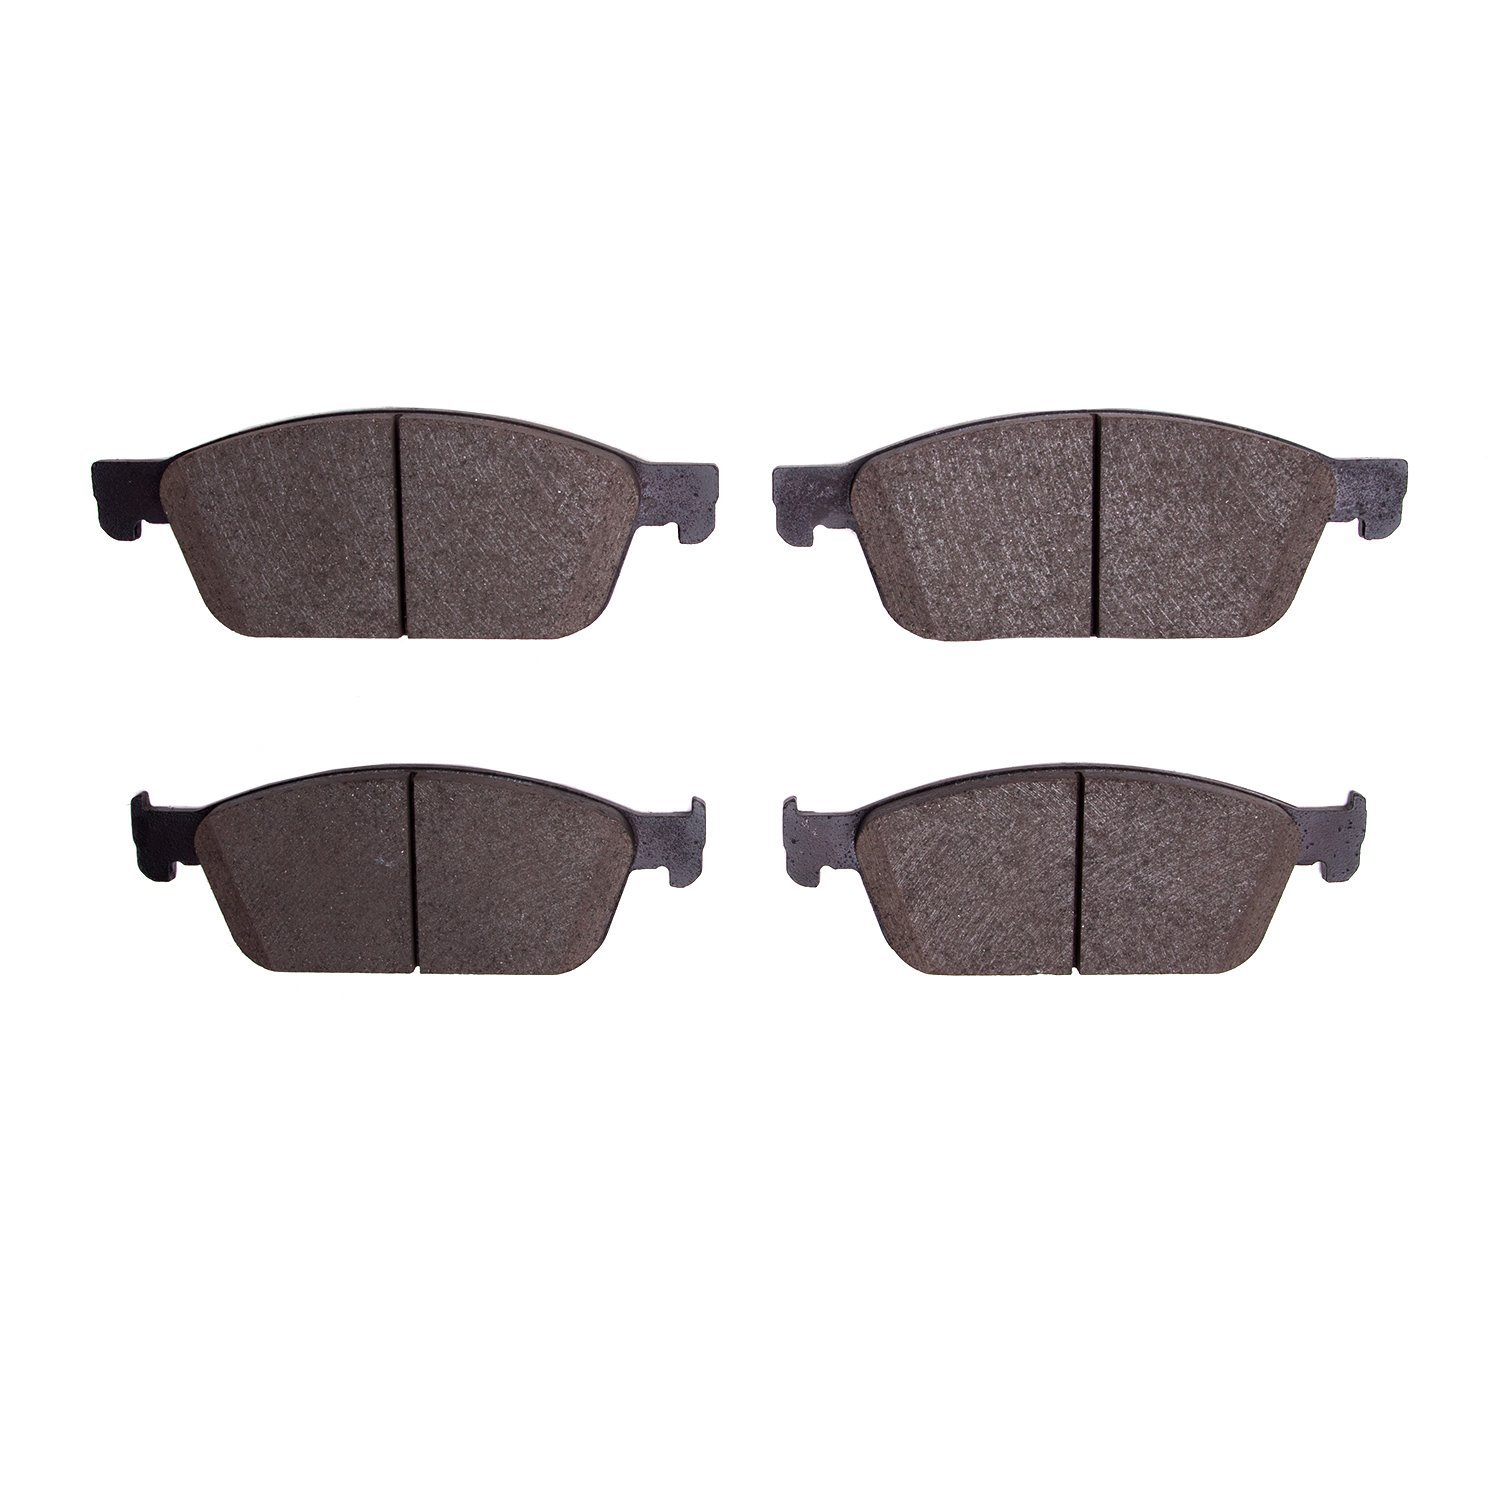 Ceramic Brake Pads, Fits Select Ford/Lincoln/Mercury/Mazda, Position: Front